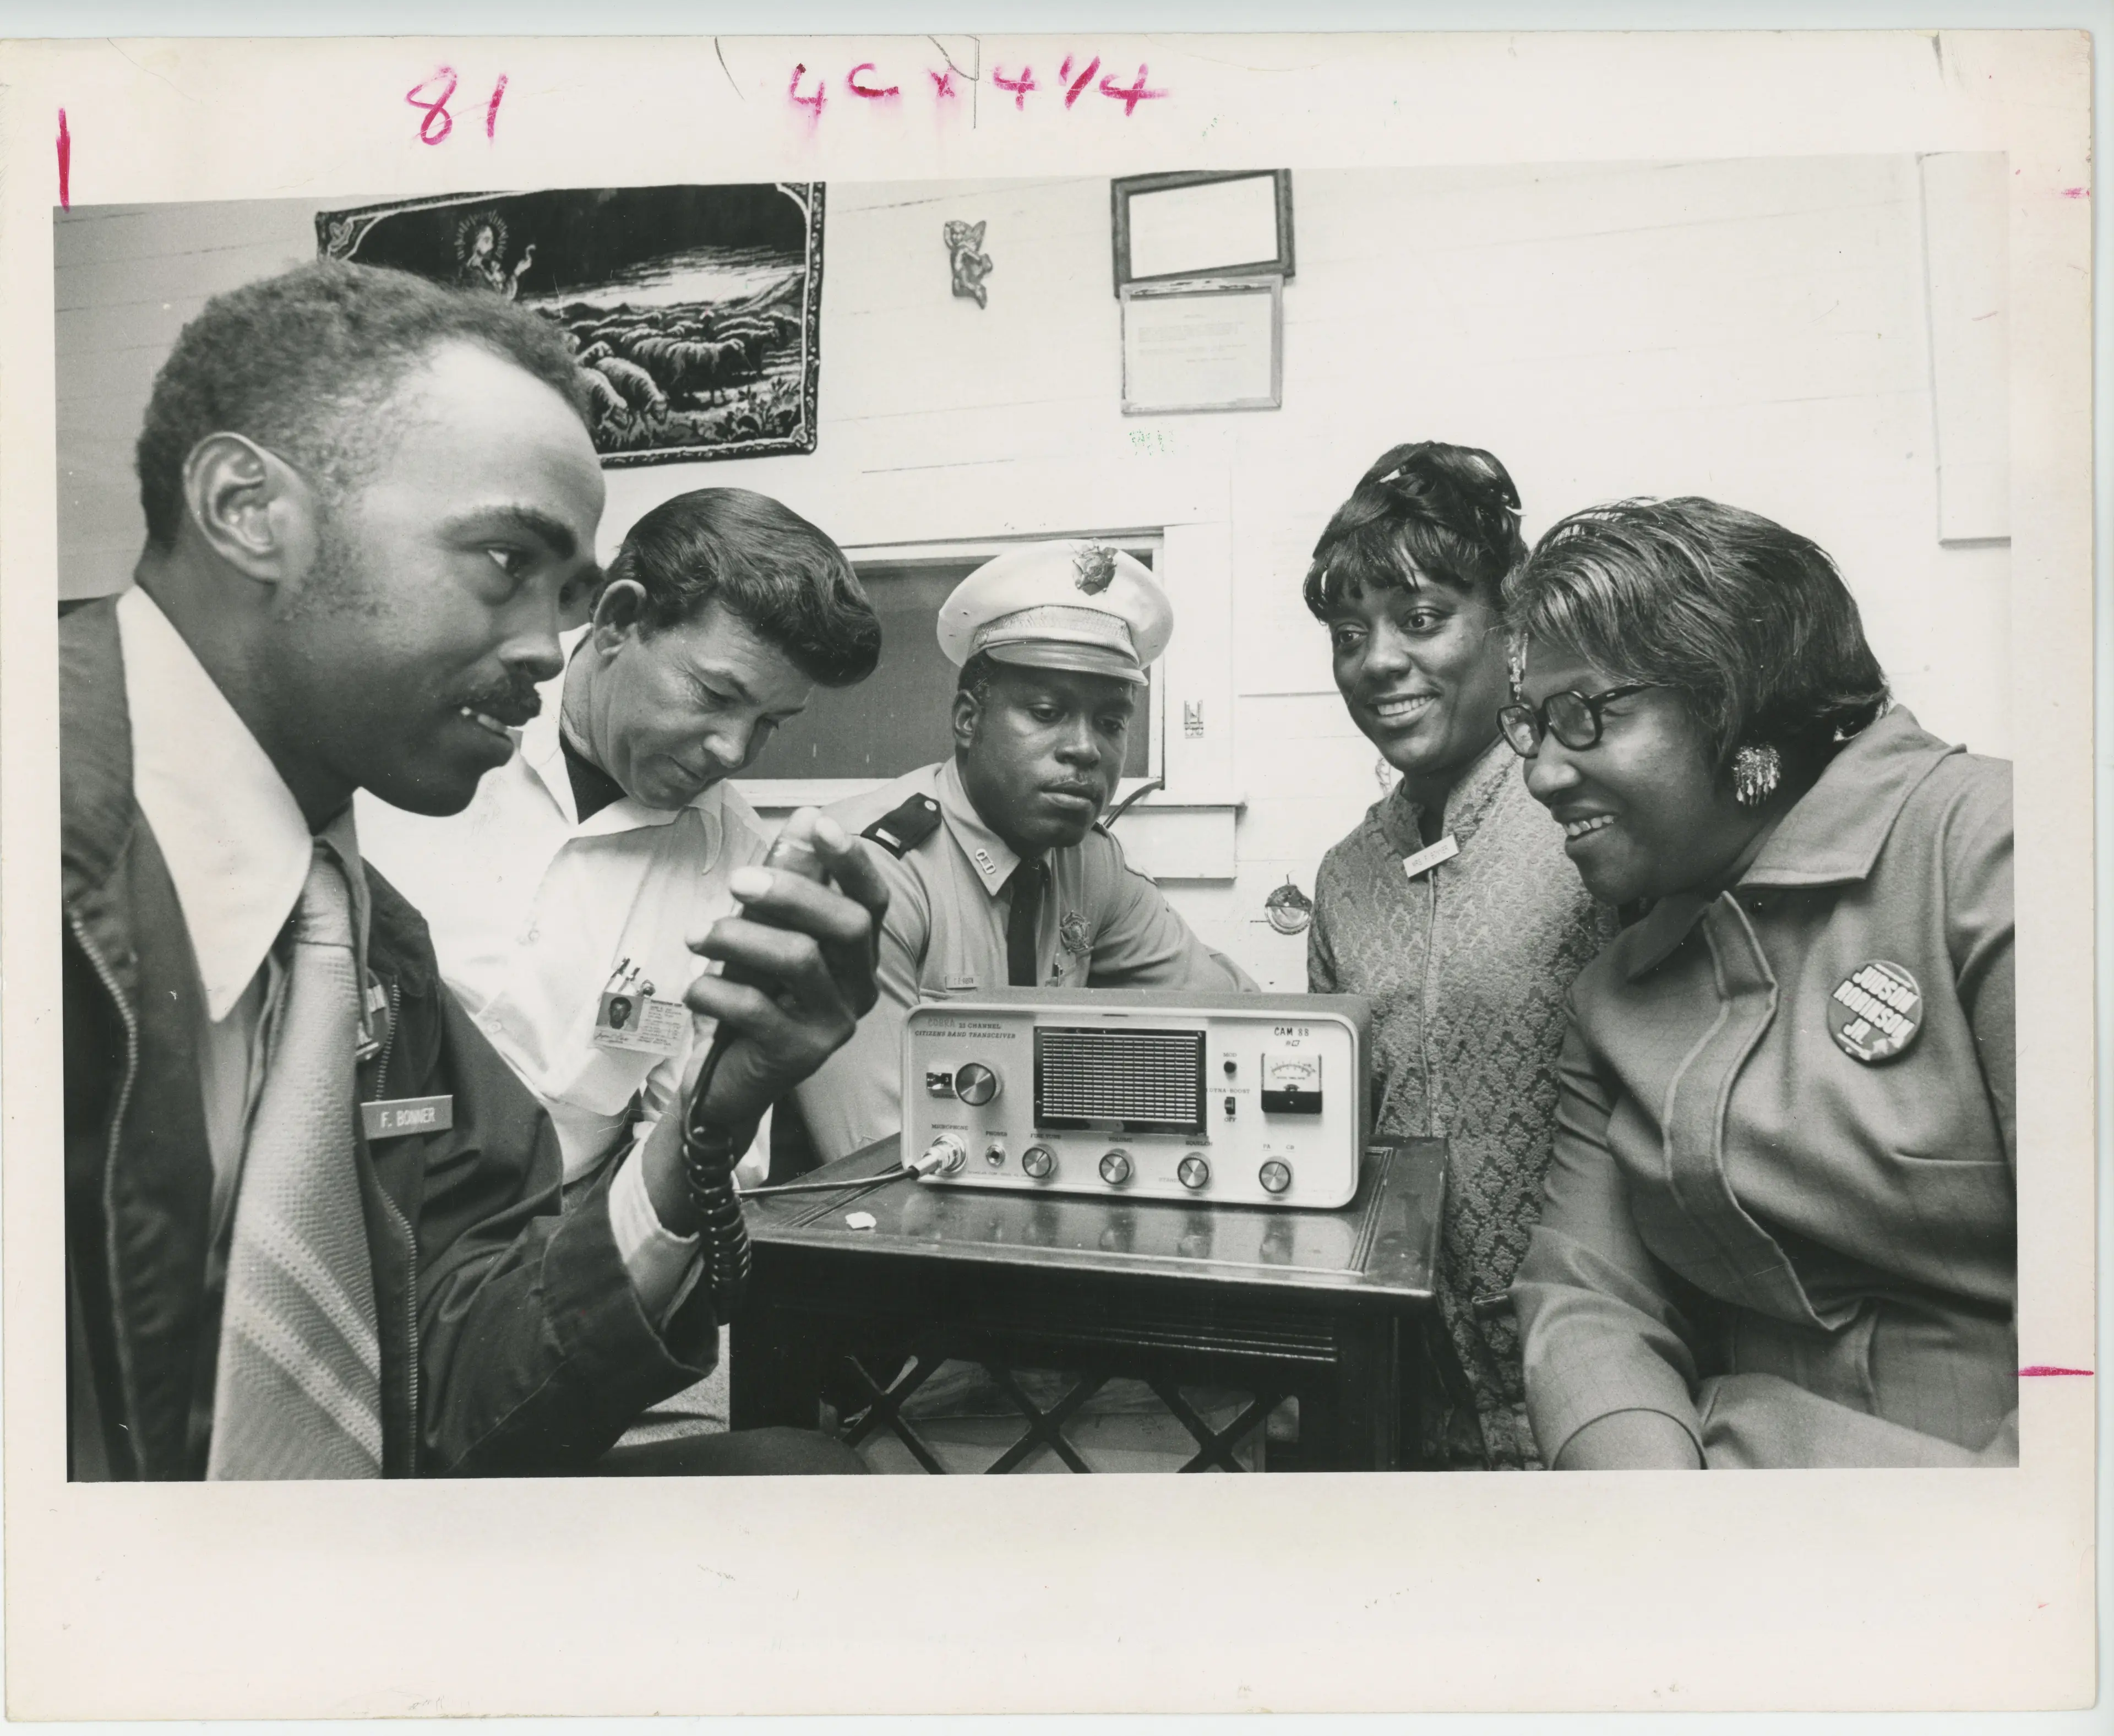 Black and white photo of three black men and three black women sitting around a CB radio with the man in foreground speaking into the microphone